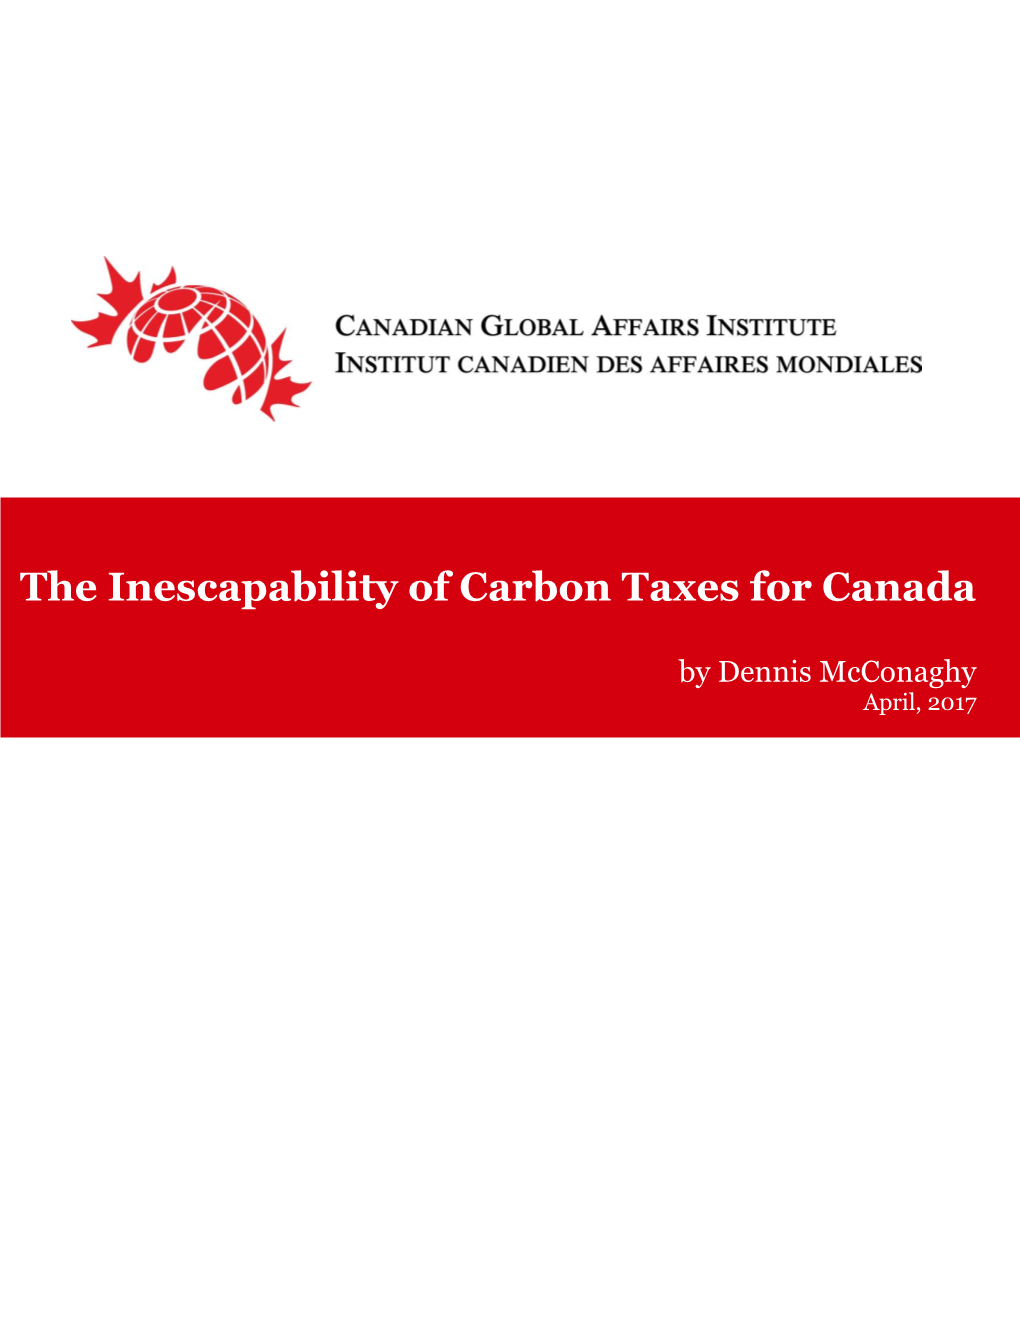 The Inescapability of Carbon Taxes for Canada